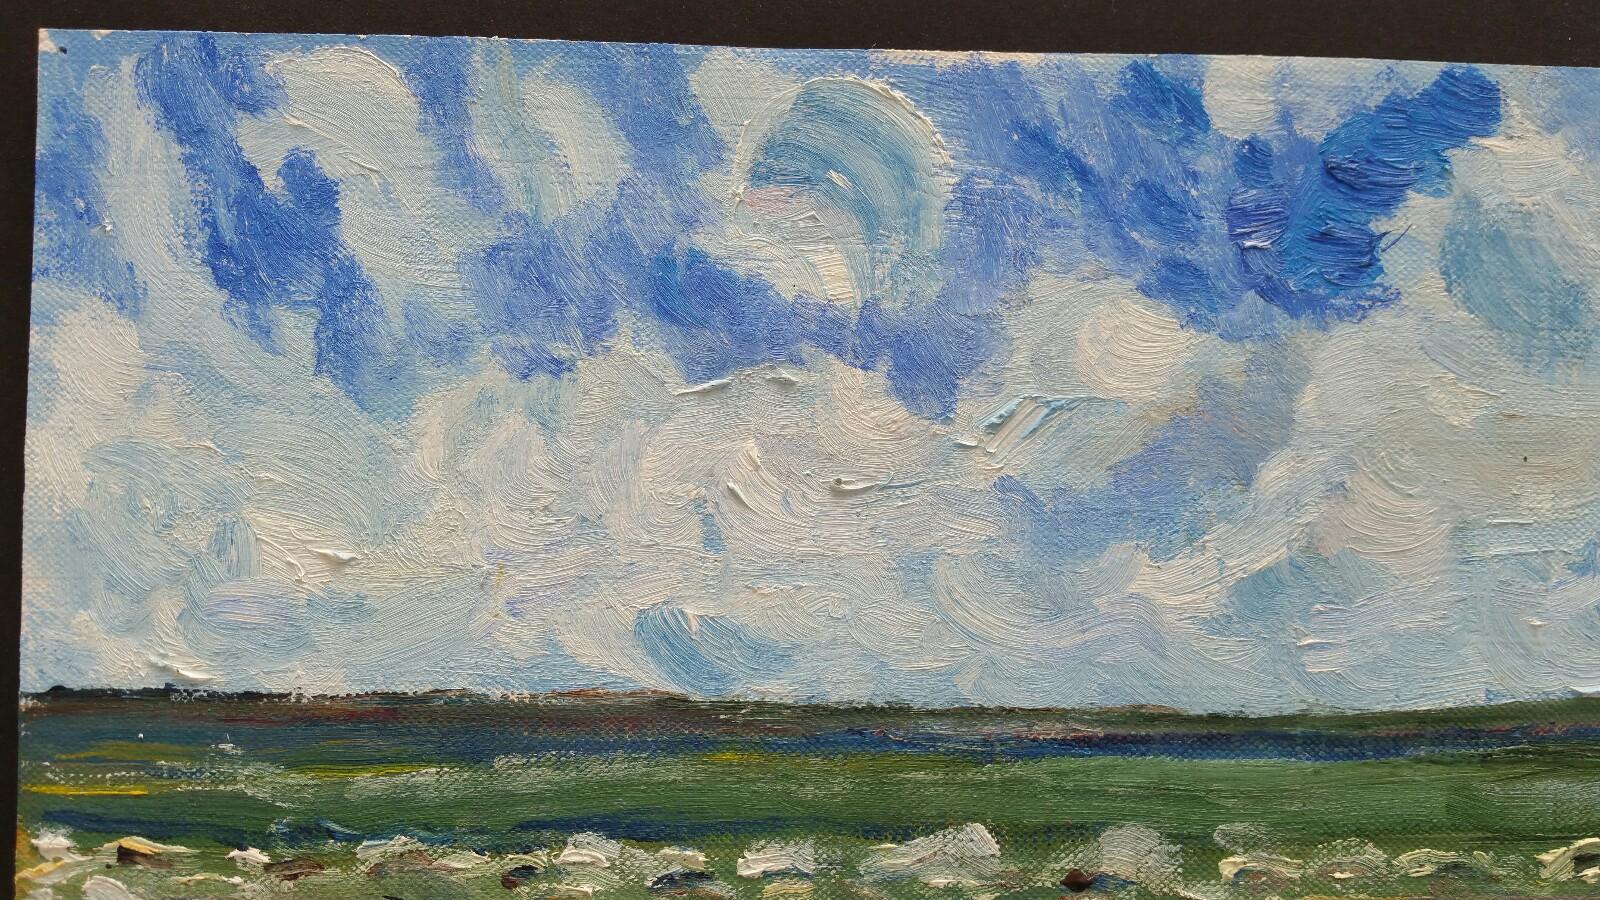 A Breezy Day Over the Coast
French School, mid-late 20th century
unsigned
oil painting on canvas textured paper (reverse side is smooth, the painted side looks and feels as canvas), unframed
overall 9 x 15 inches

One can almost feel the blustery